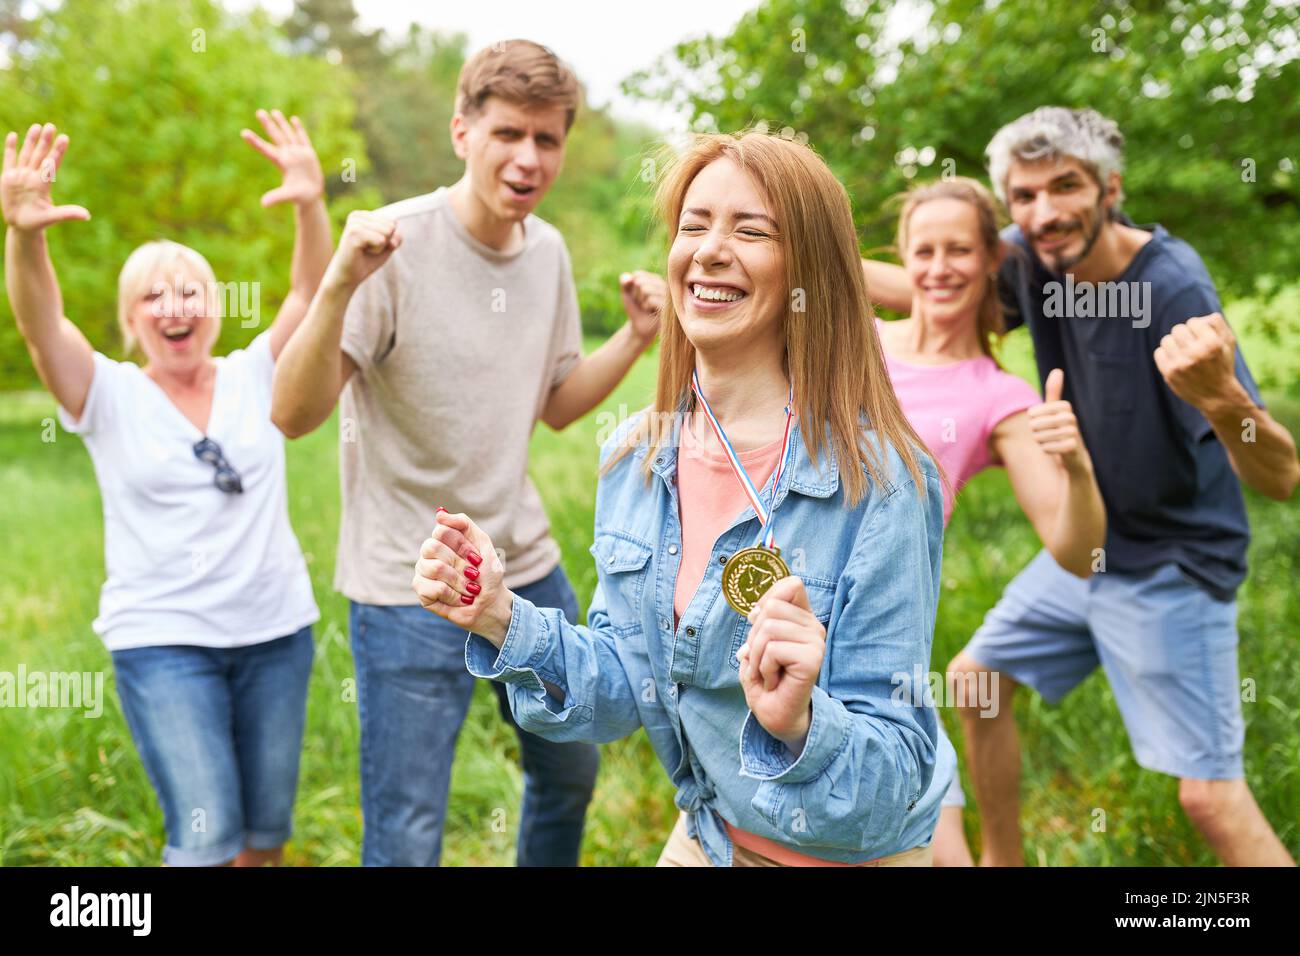 Young woman with a medal is happy and cheers with her friends as a team on a success Stock Photo